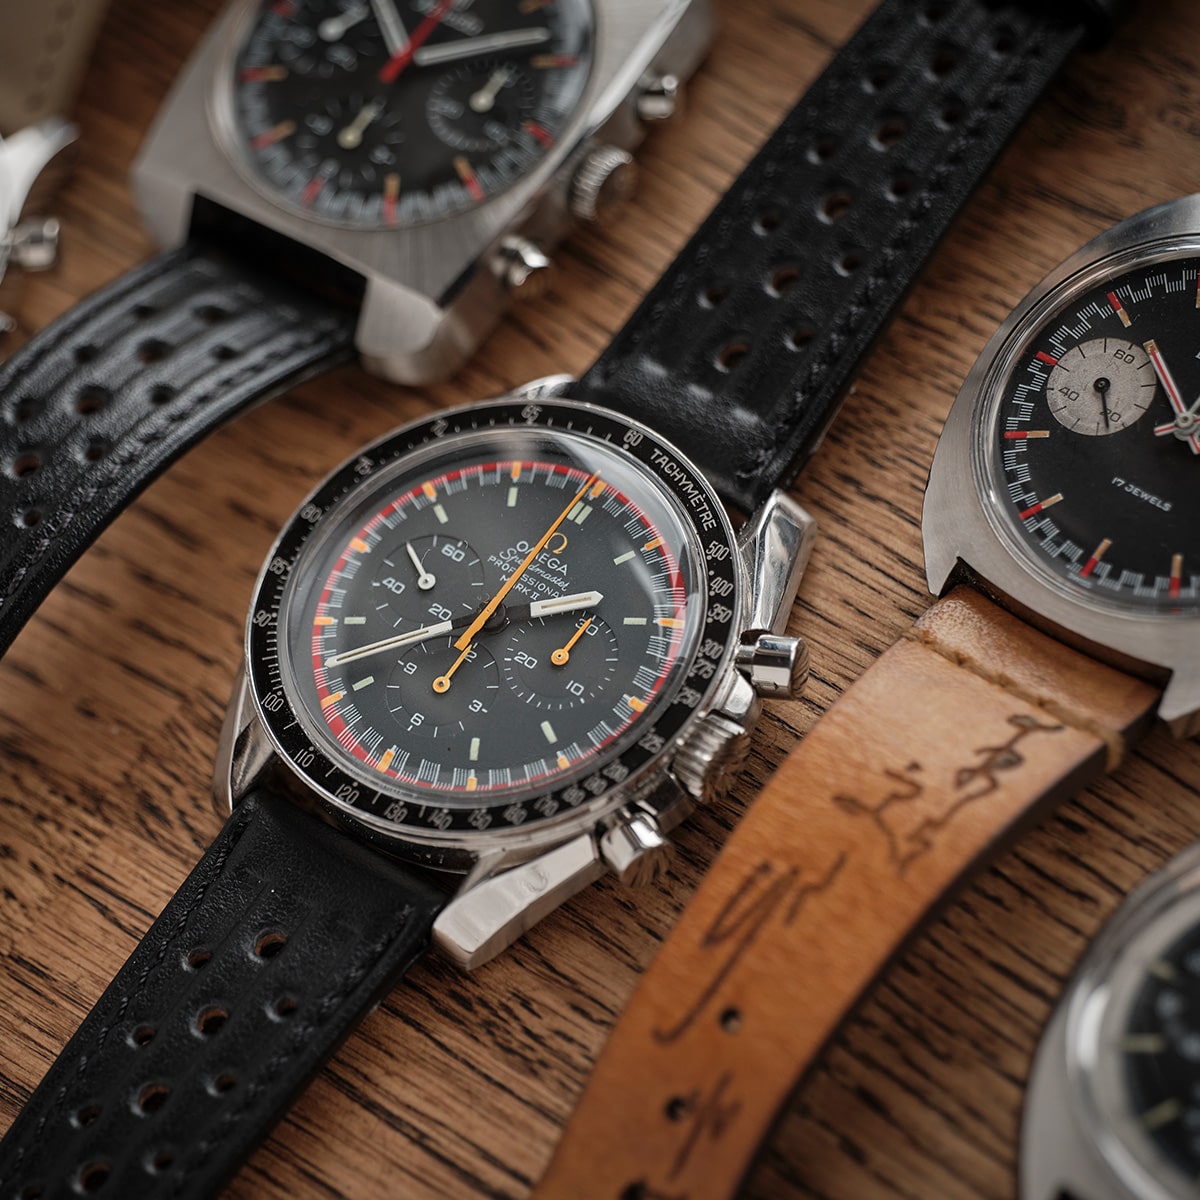 Exotic dial chronographs and Speedmaster